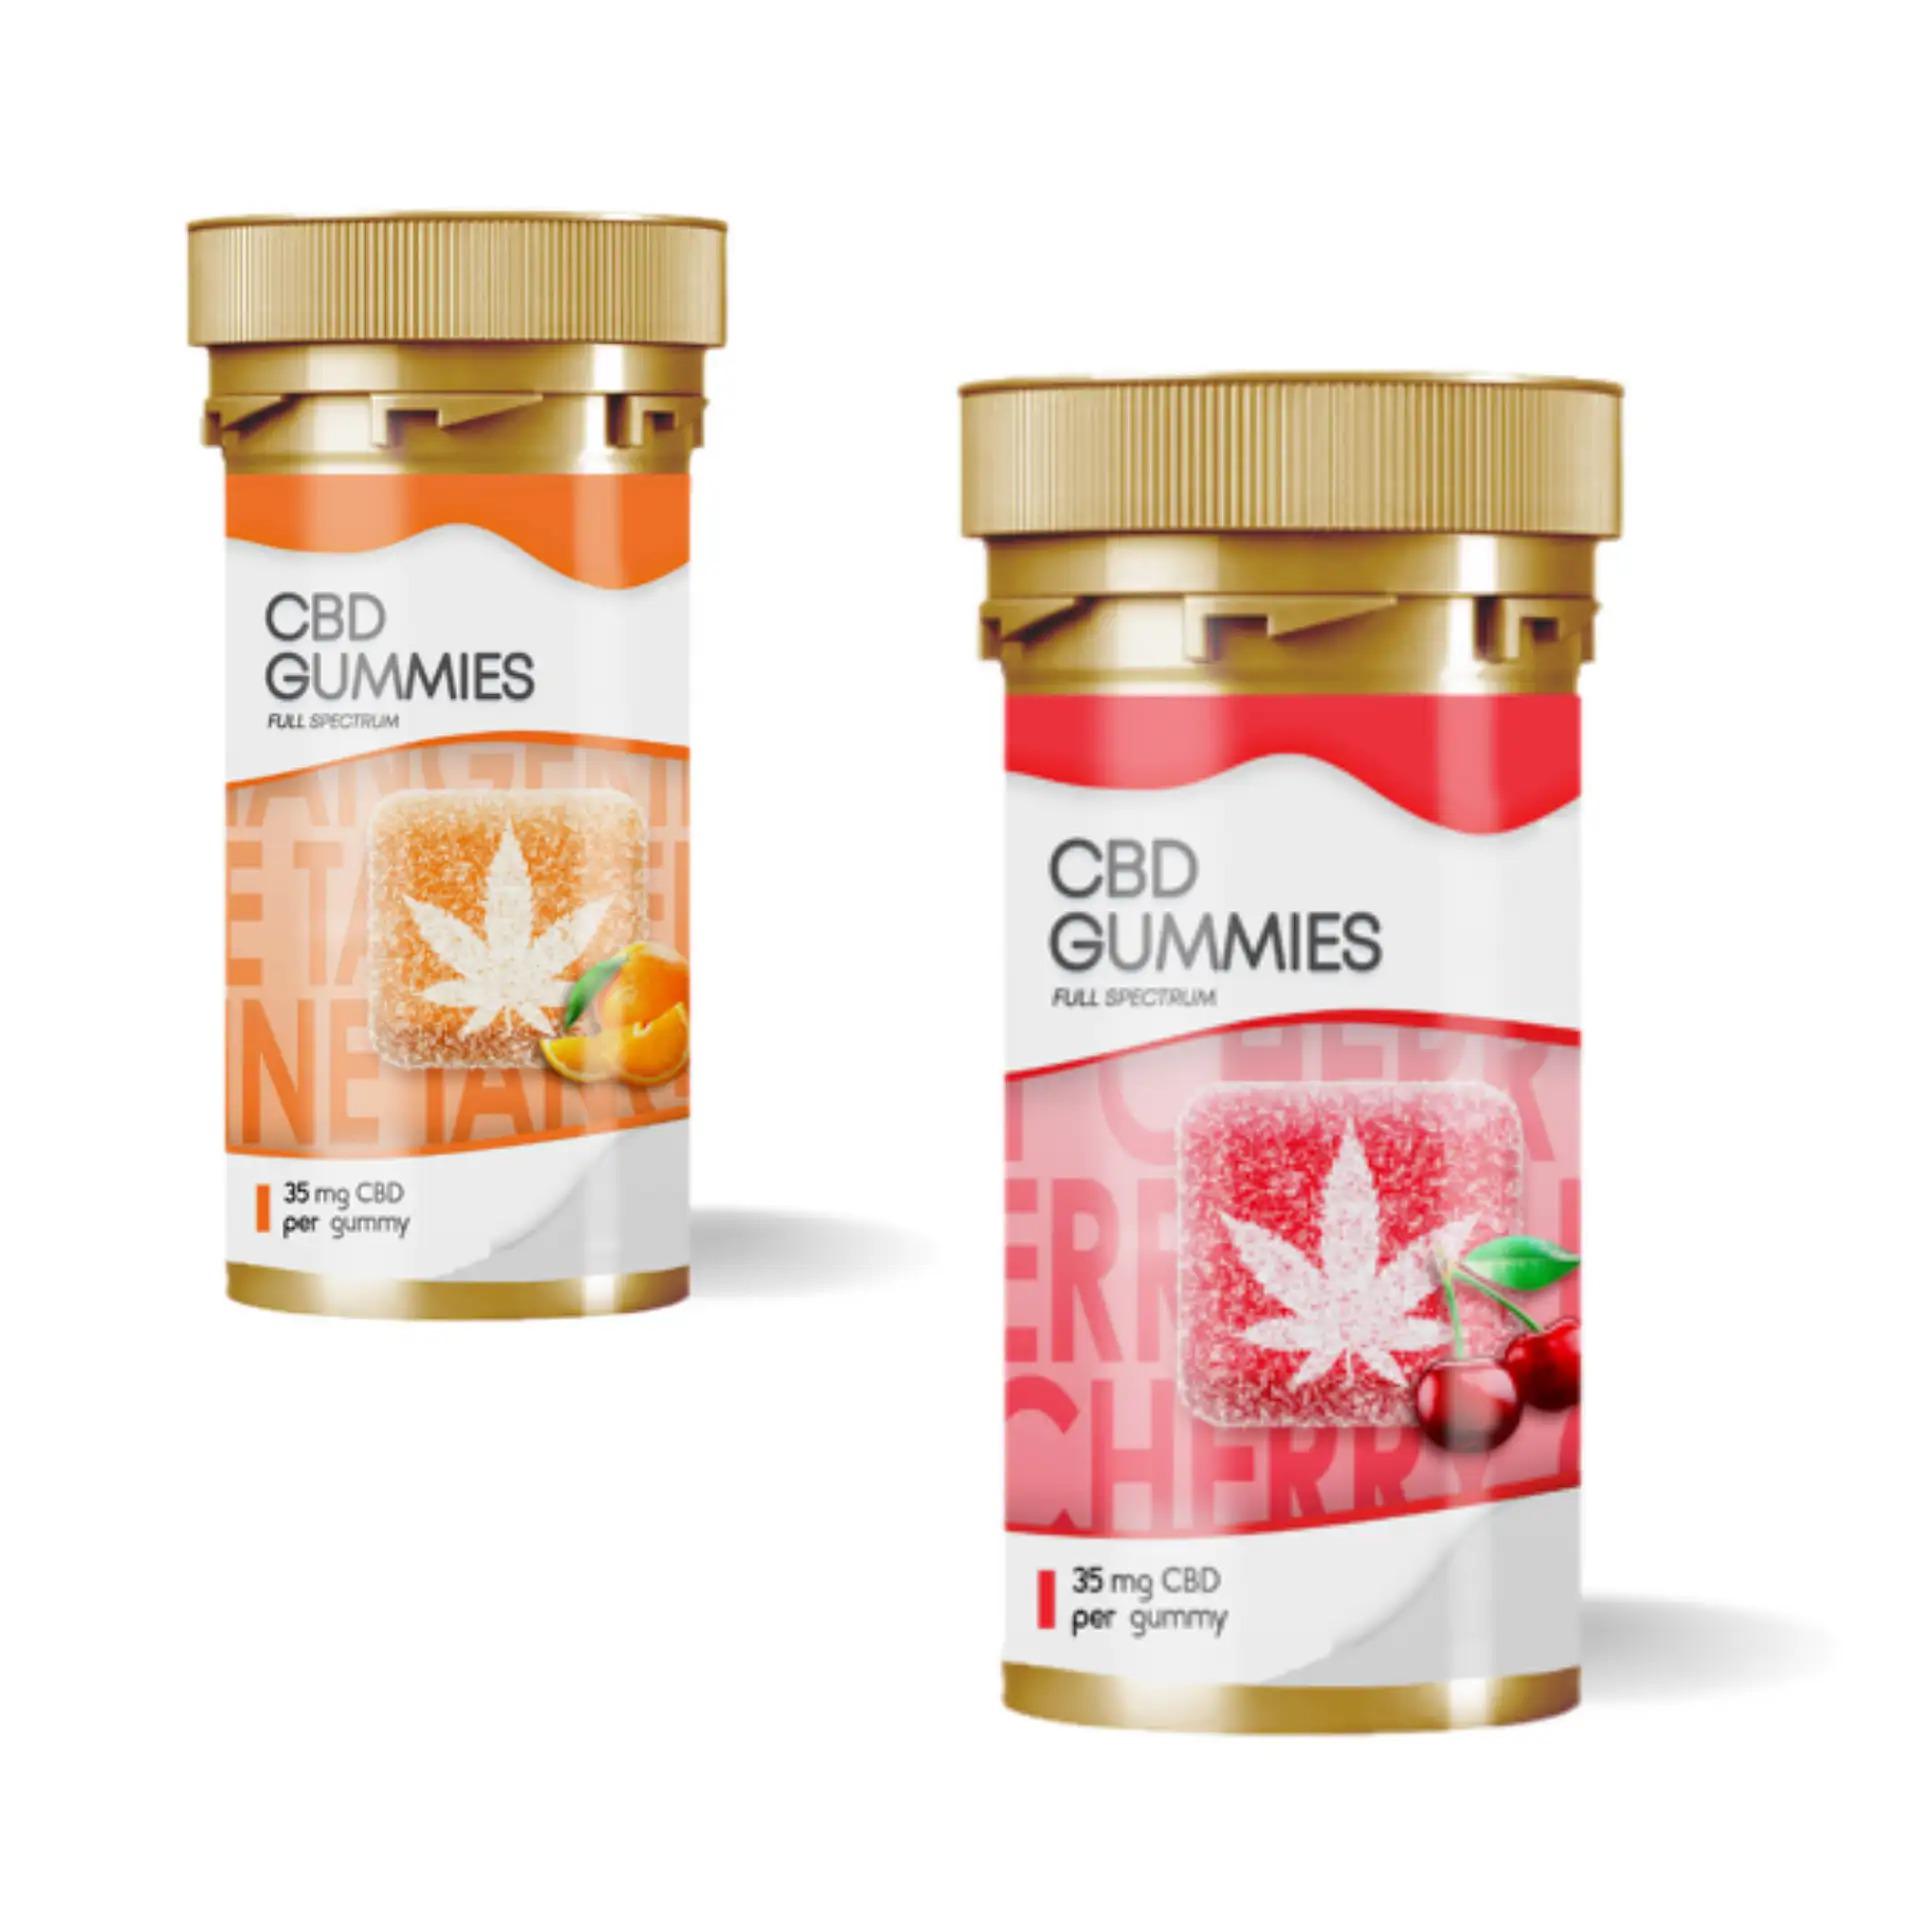 Our Full Spectrum CBD Gummies utilize every part of the hemp plant for ultimate relaxation. Our gummies come in delicious flavors with very little hemp taste. Full Spectrum CBD products also contain smaller amounts of minor cannabinoids such as CBC and CBG. When minor cannabinoids are together with CBD in a product, it does what’s called the ‘entourage effect’ where the CBD is better absorbed into our system.